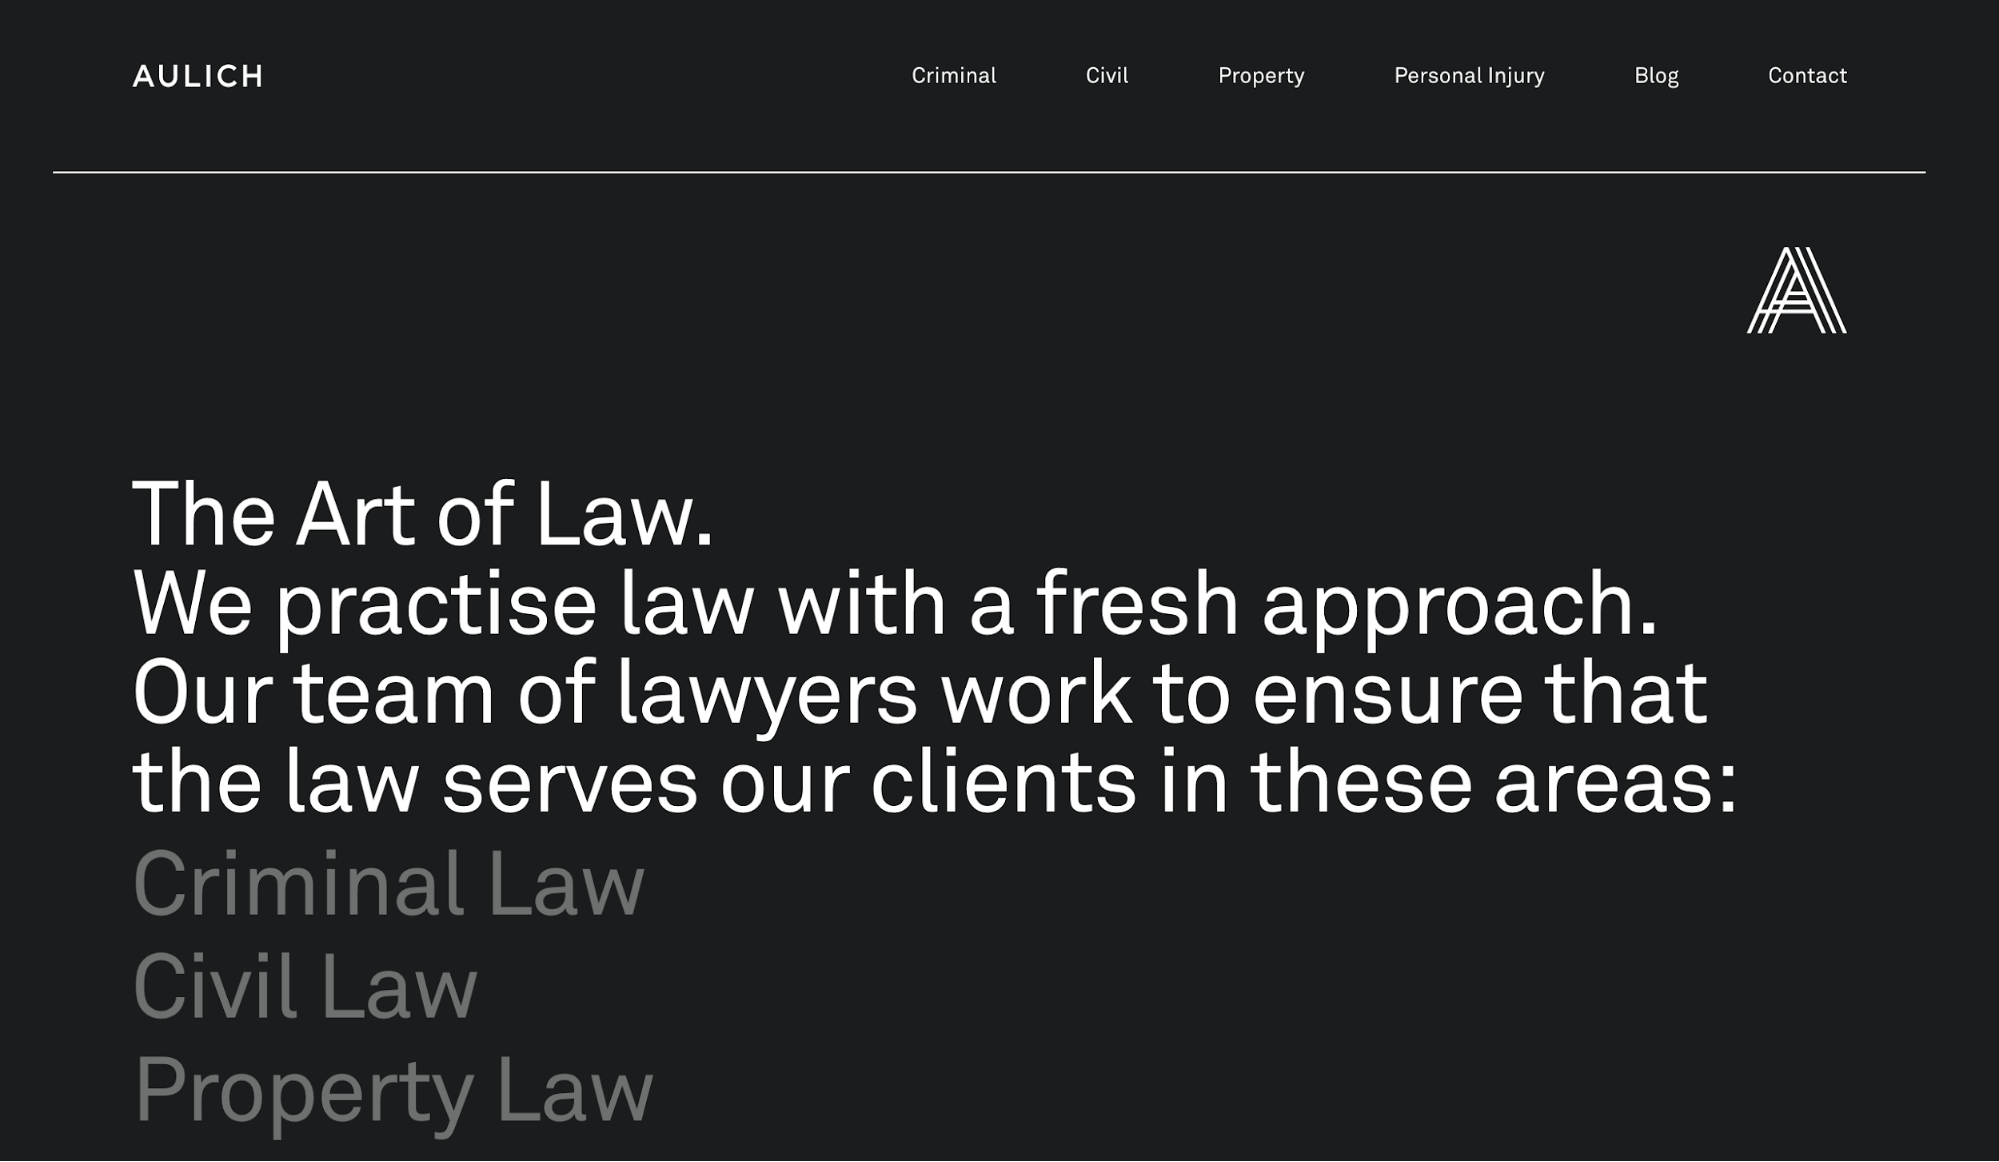 Aulich Law has a clear UVP on its landing page